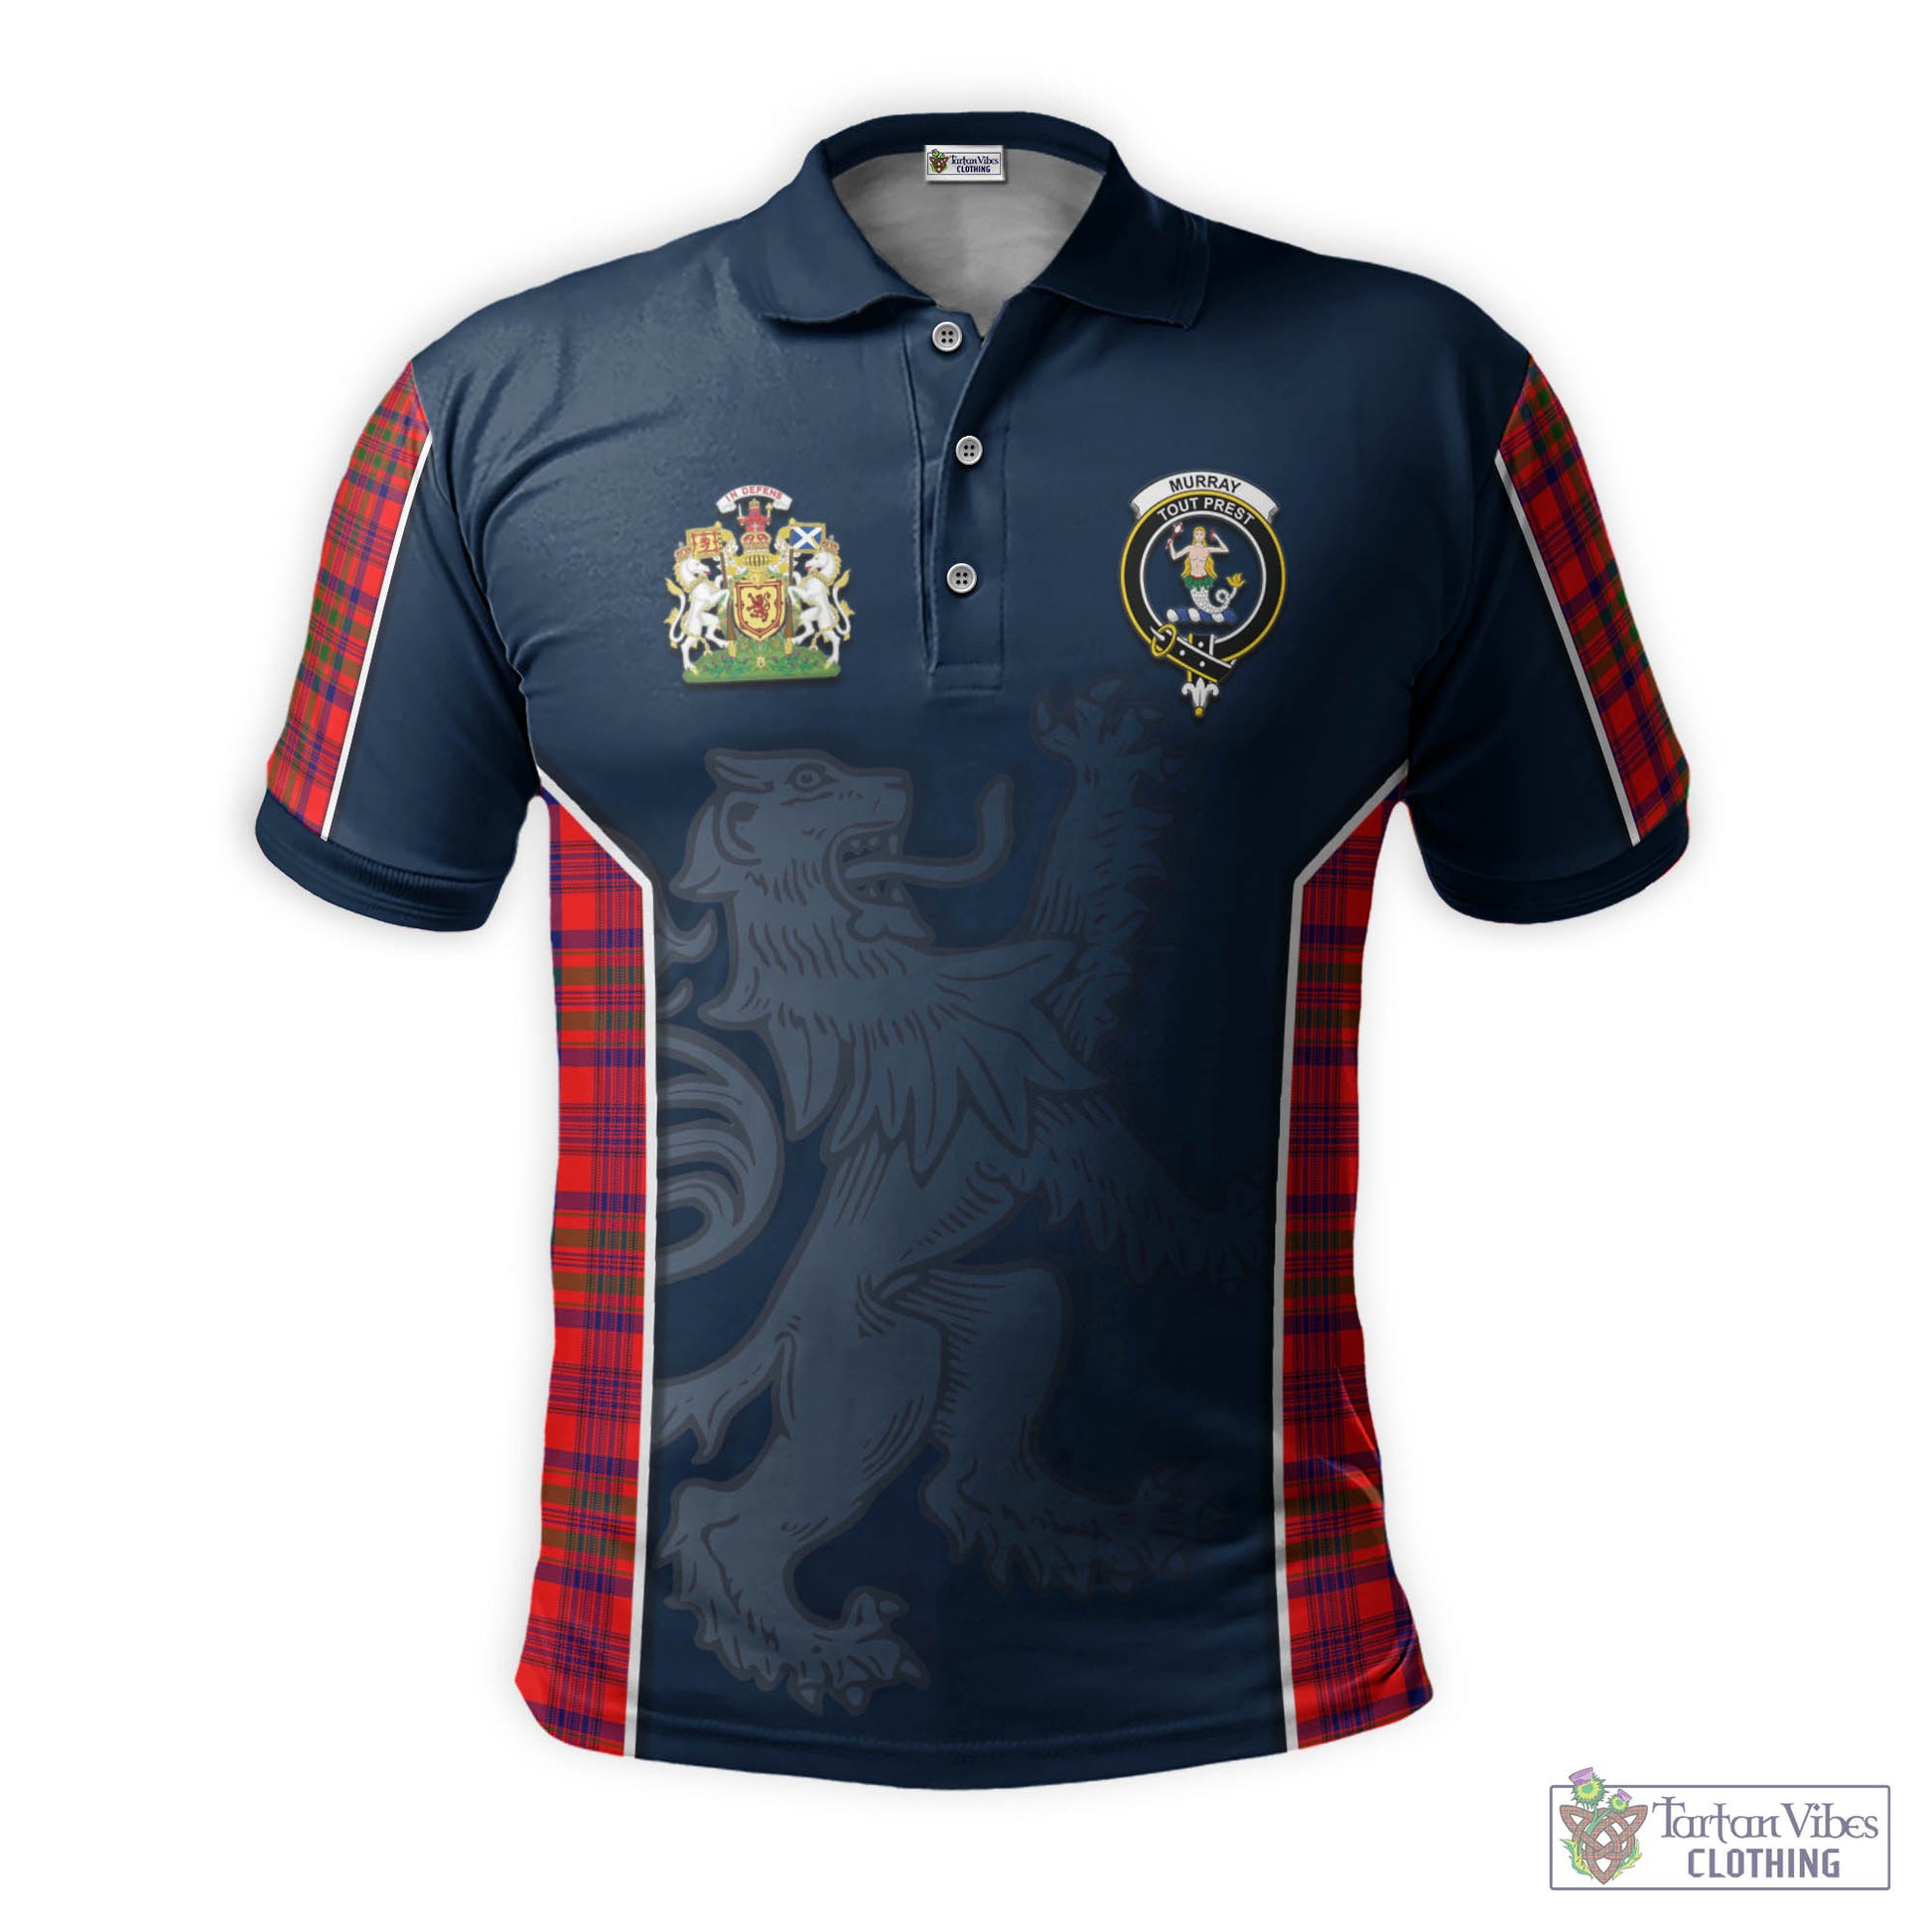 Tartan Vibes Clothing Murray of Tulloch Modern Tartan Men's Polo Shirt with Family Crest and Lion Rampant Vibes Sport Style